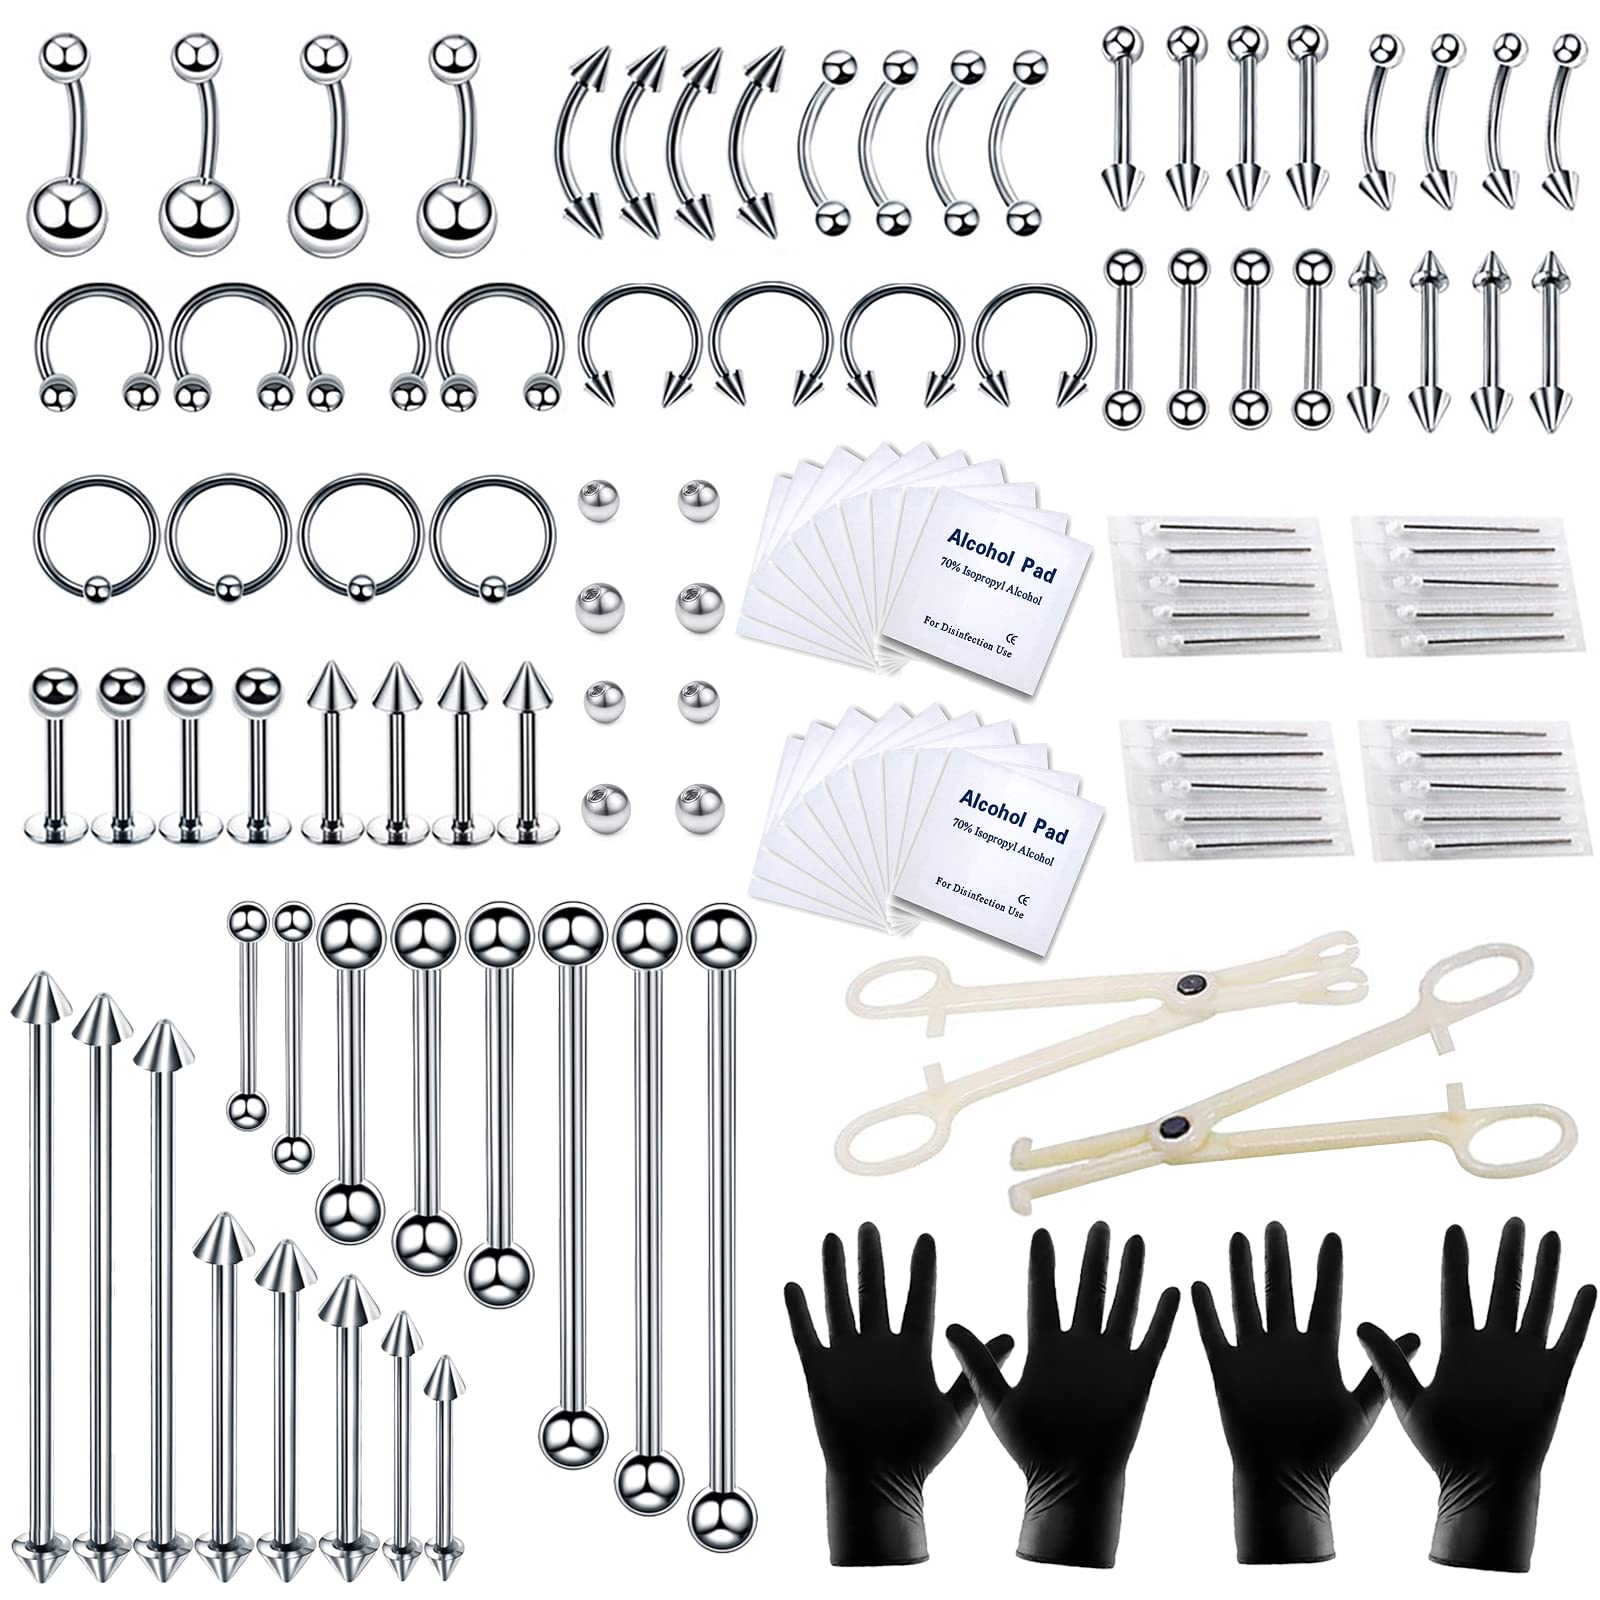 Tustrion 118PCS Piercing Kit for All Body Piercings Stainless Steel Piercing Jewelry 14G 16G Jewelry for Ear Cartilage Tragus Nose Septum Lip Nipple Piercing Tools